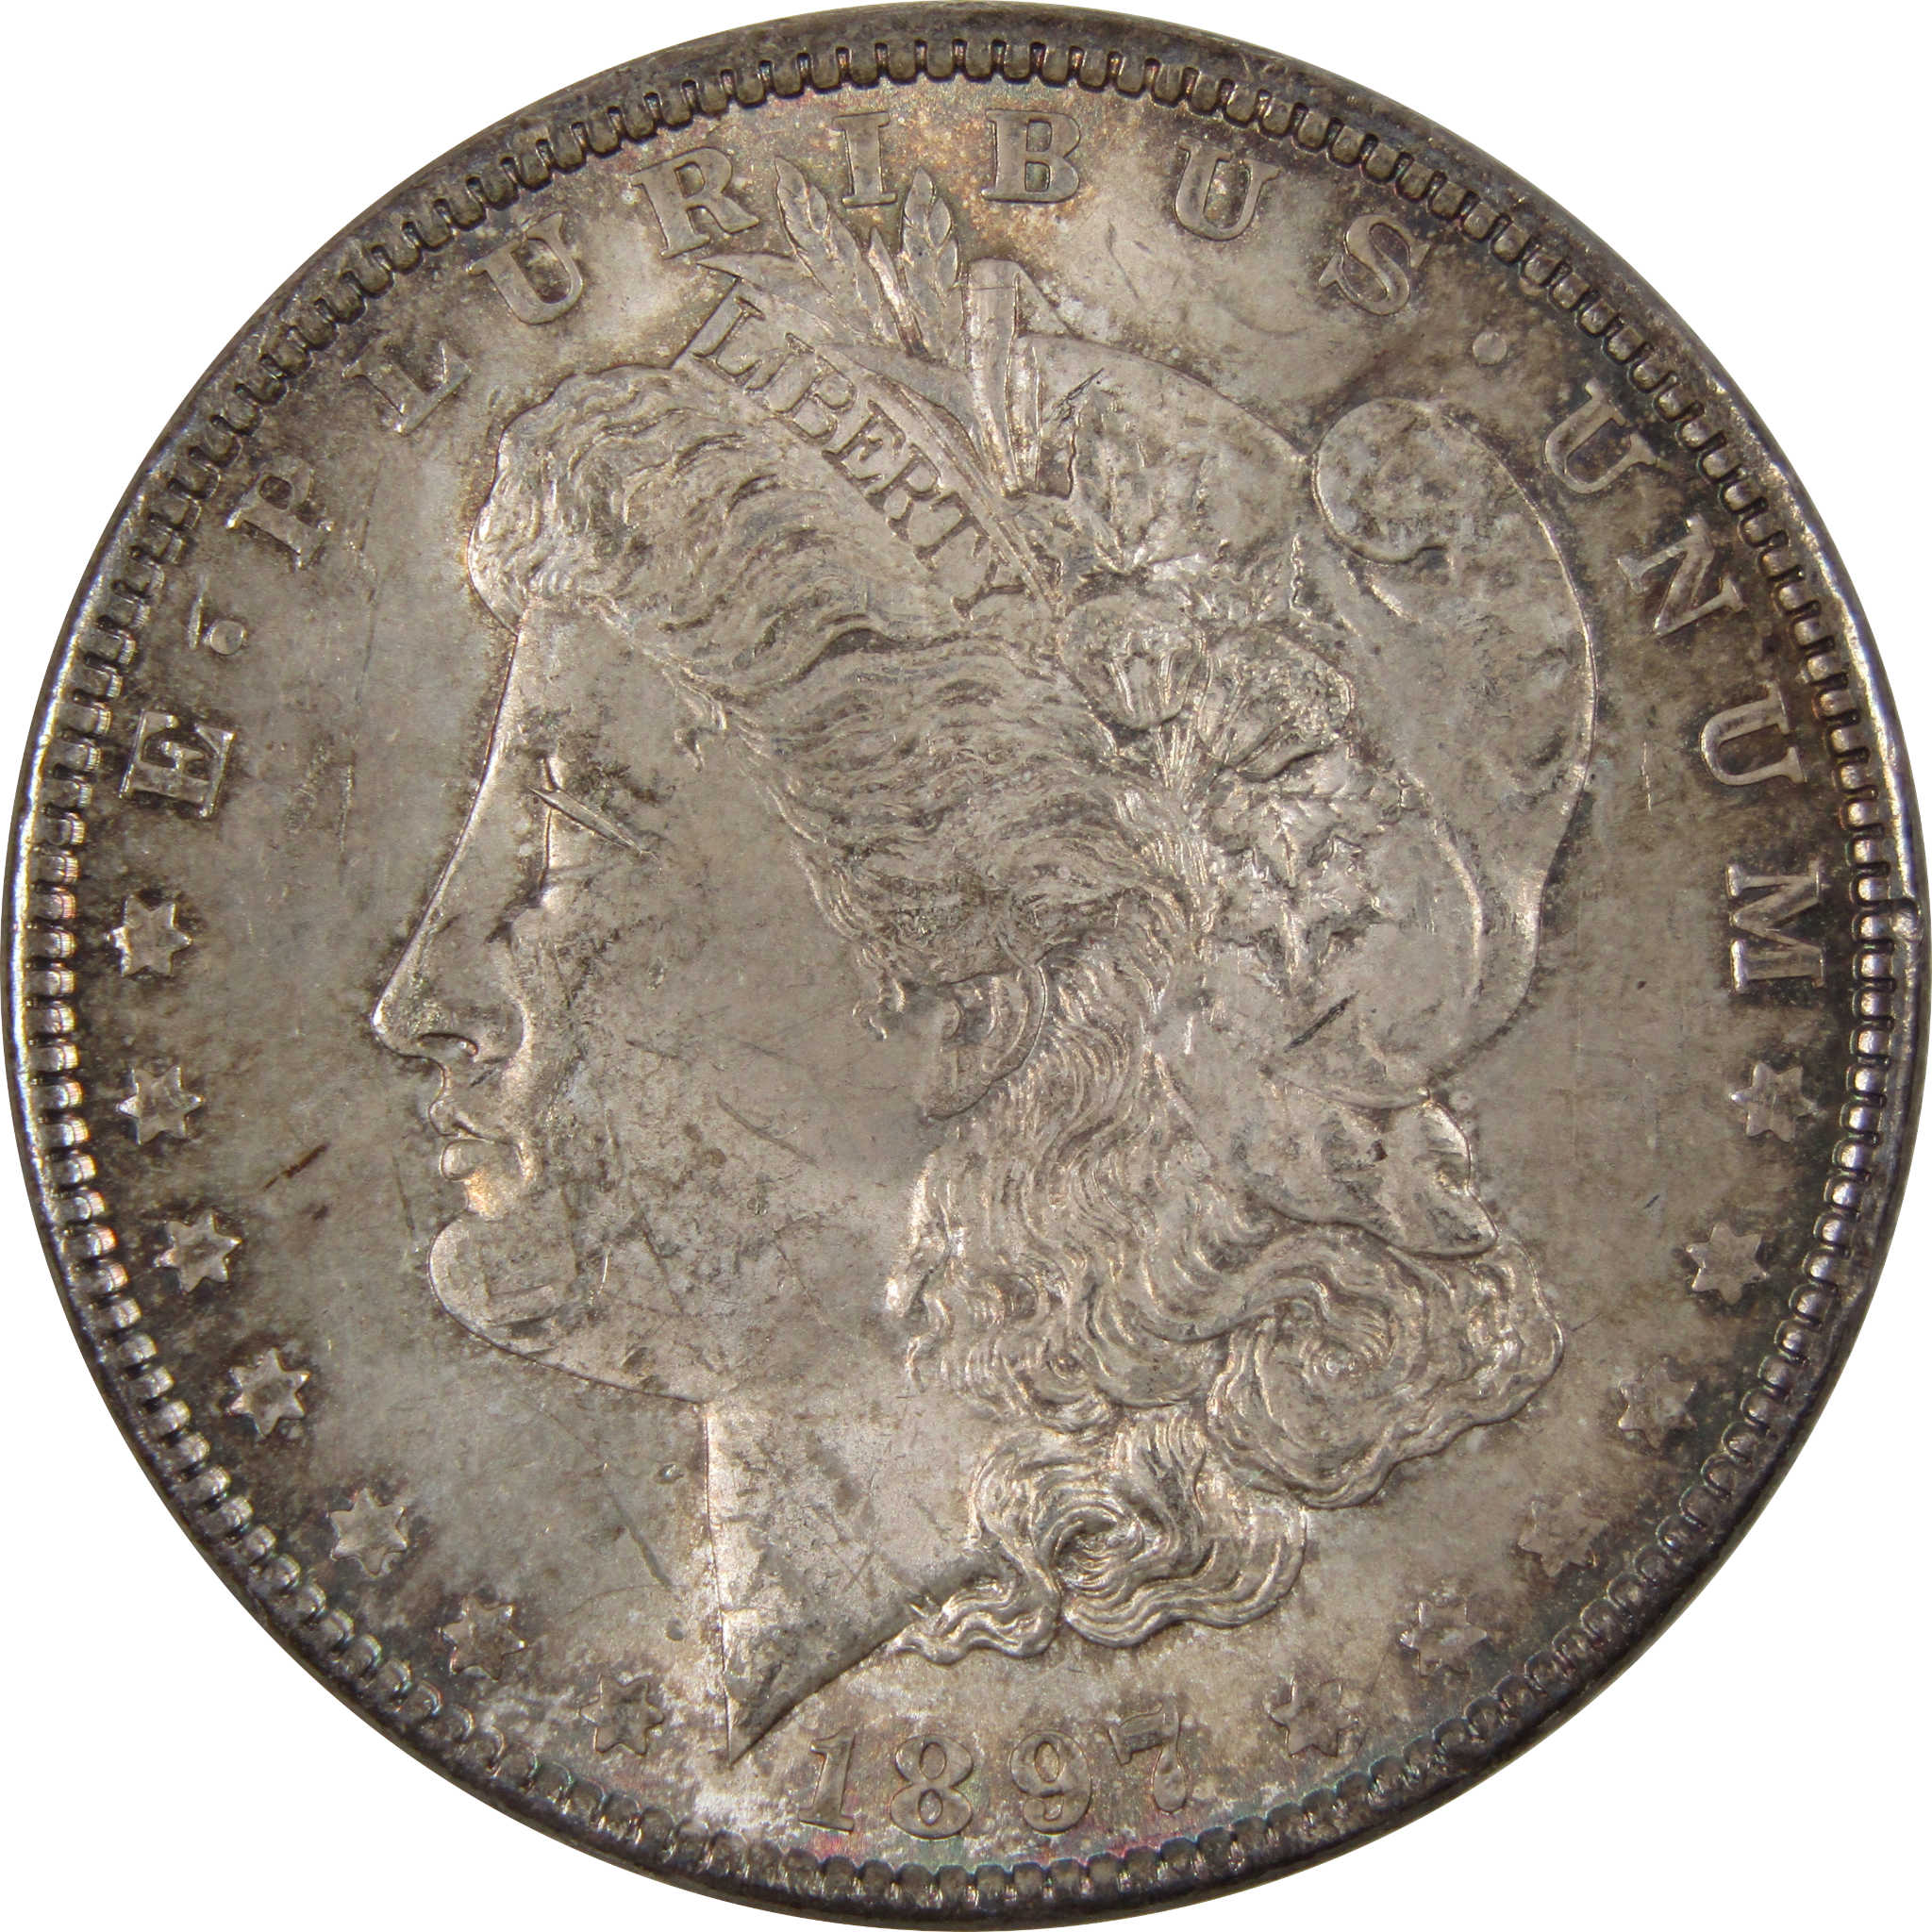 1897 Morgan Dollar AU About Uncirculated 90% Silver Coin SKU:I2797 - Morgan coin - Morgan silver dollar - Morgan silver dollar for sale - Profile Coins &amp; Collectibles